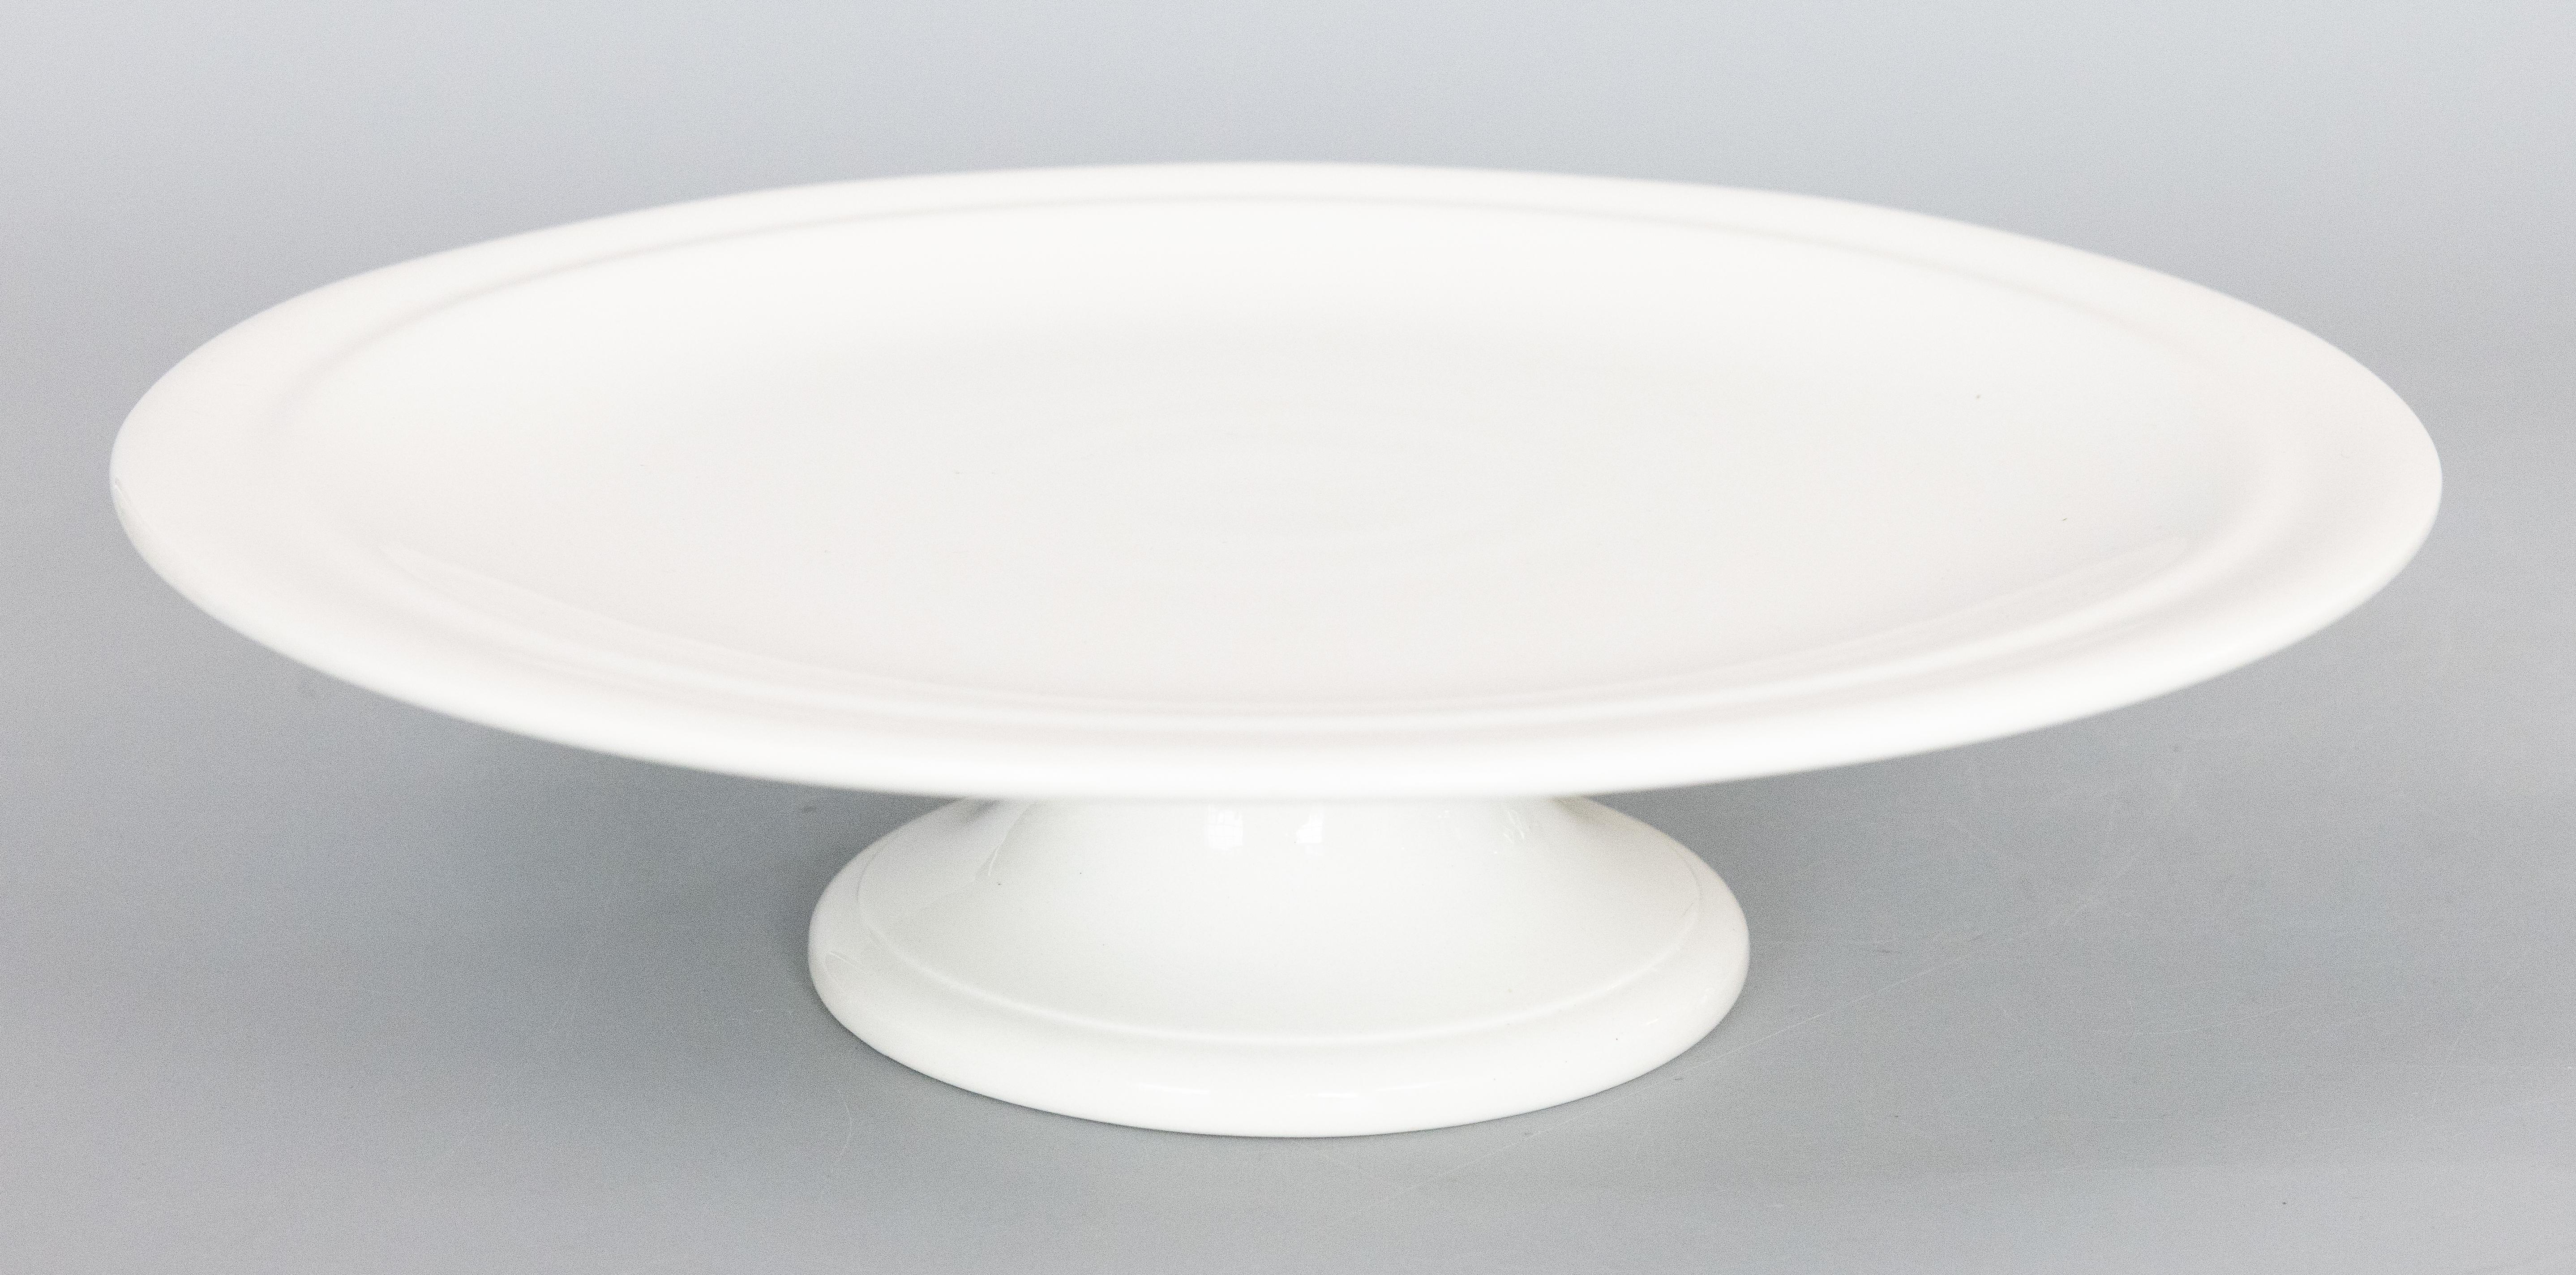 A gorgeous antique white ironstone cake stand on a pedestal made by NIMY Imperiale Royale from Belgium, circa 1890. Maker's mark on reverse. A highly collectible ironstone piece in beautiful antique condition. This gorgeous cake stand will elevate